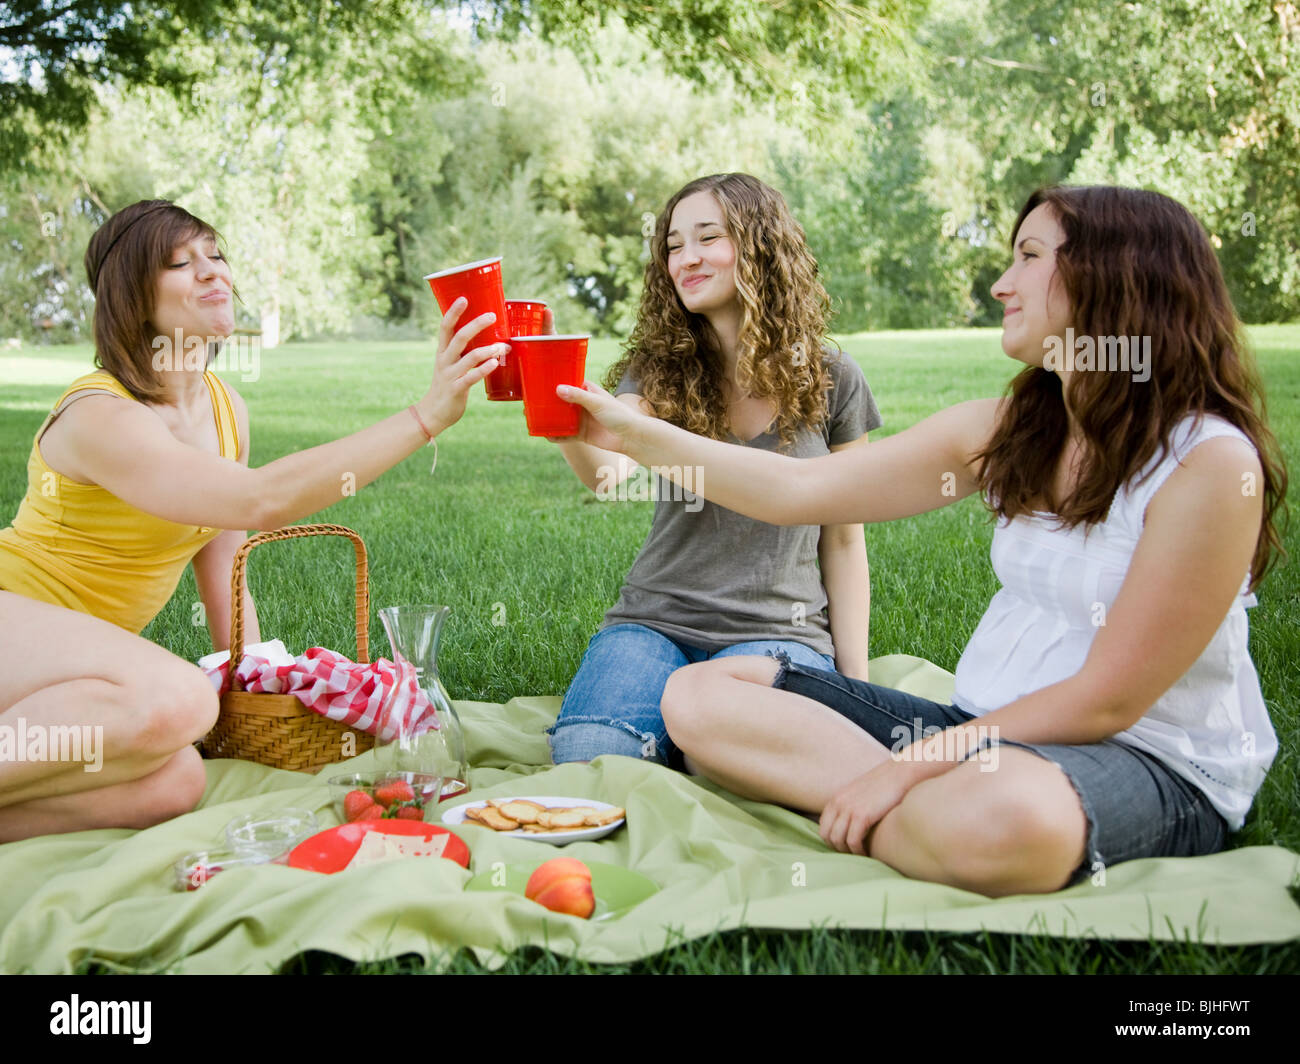 three young women having a picnic on the grass in a park Stock Photo